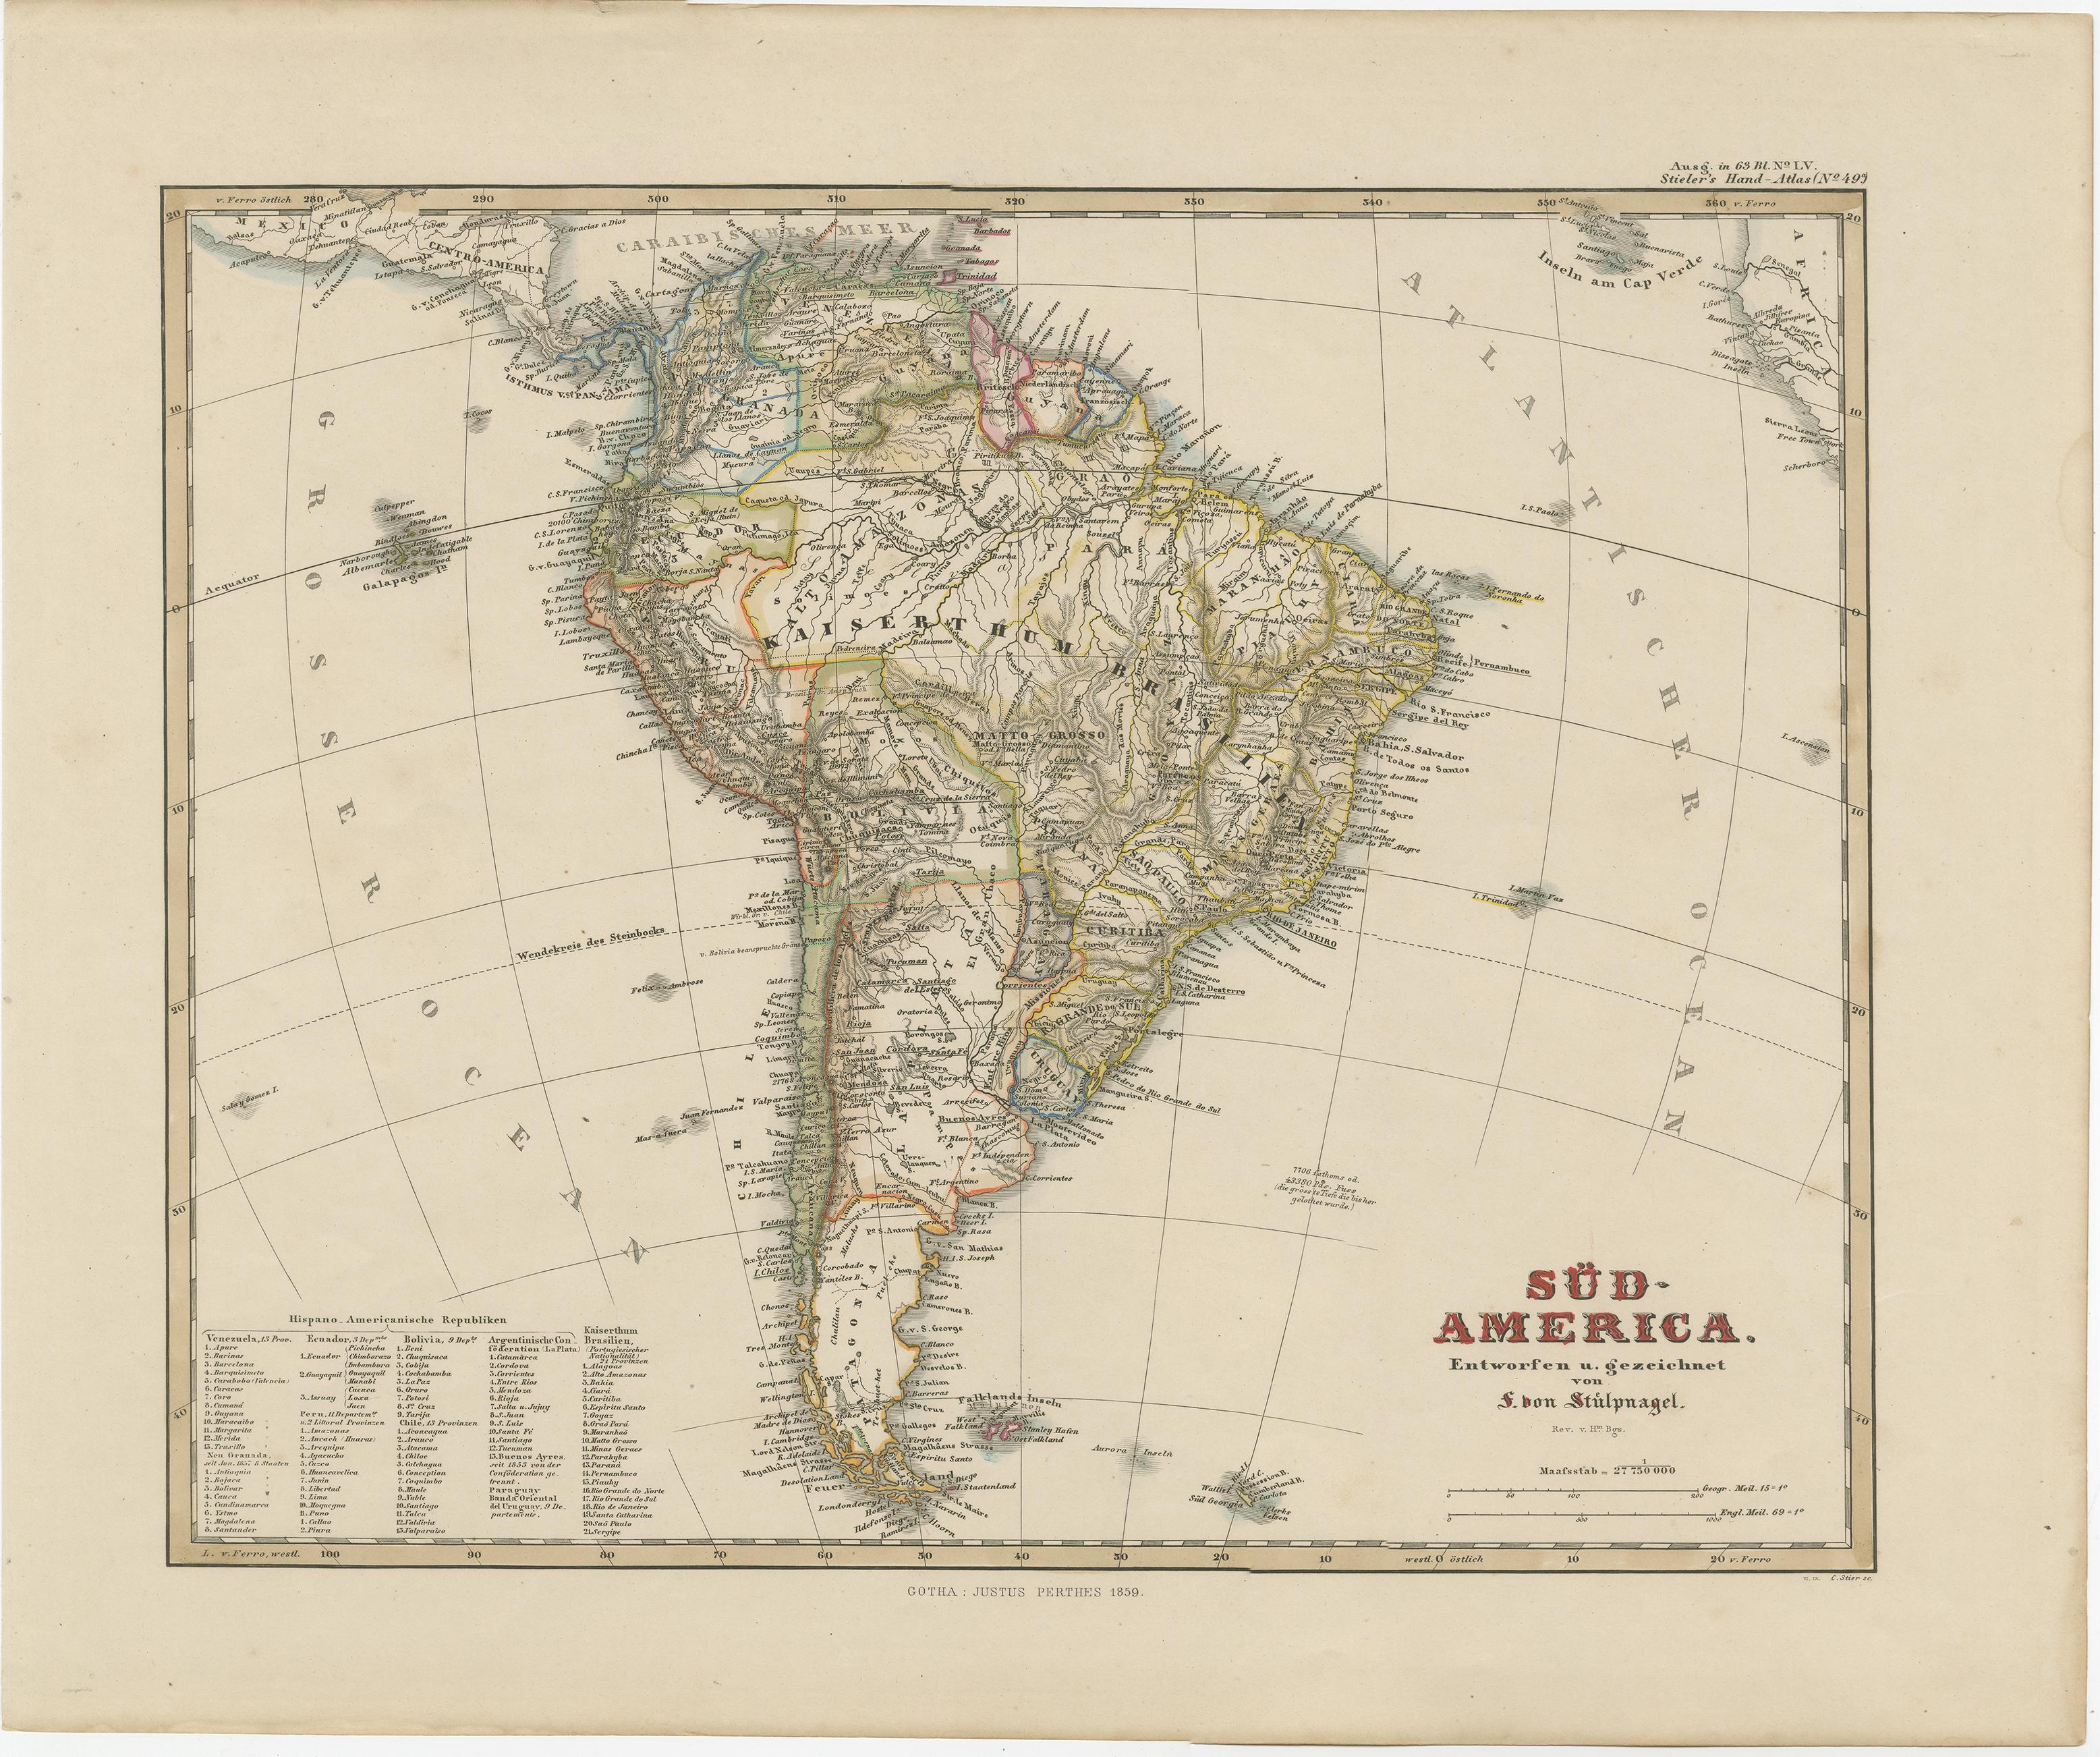 Original antique map titled 'Süd-America'. Beautiful old map of South America, with many details and legend. 

This map originates from Stielers Handatlas, published circa 1859. Stielers Handatlas (after Adolf Stieler, 1775–1836), formally titled